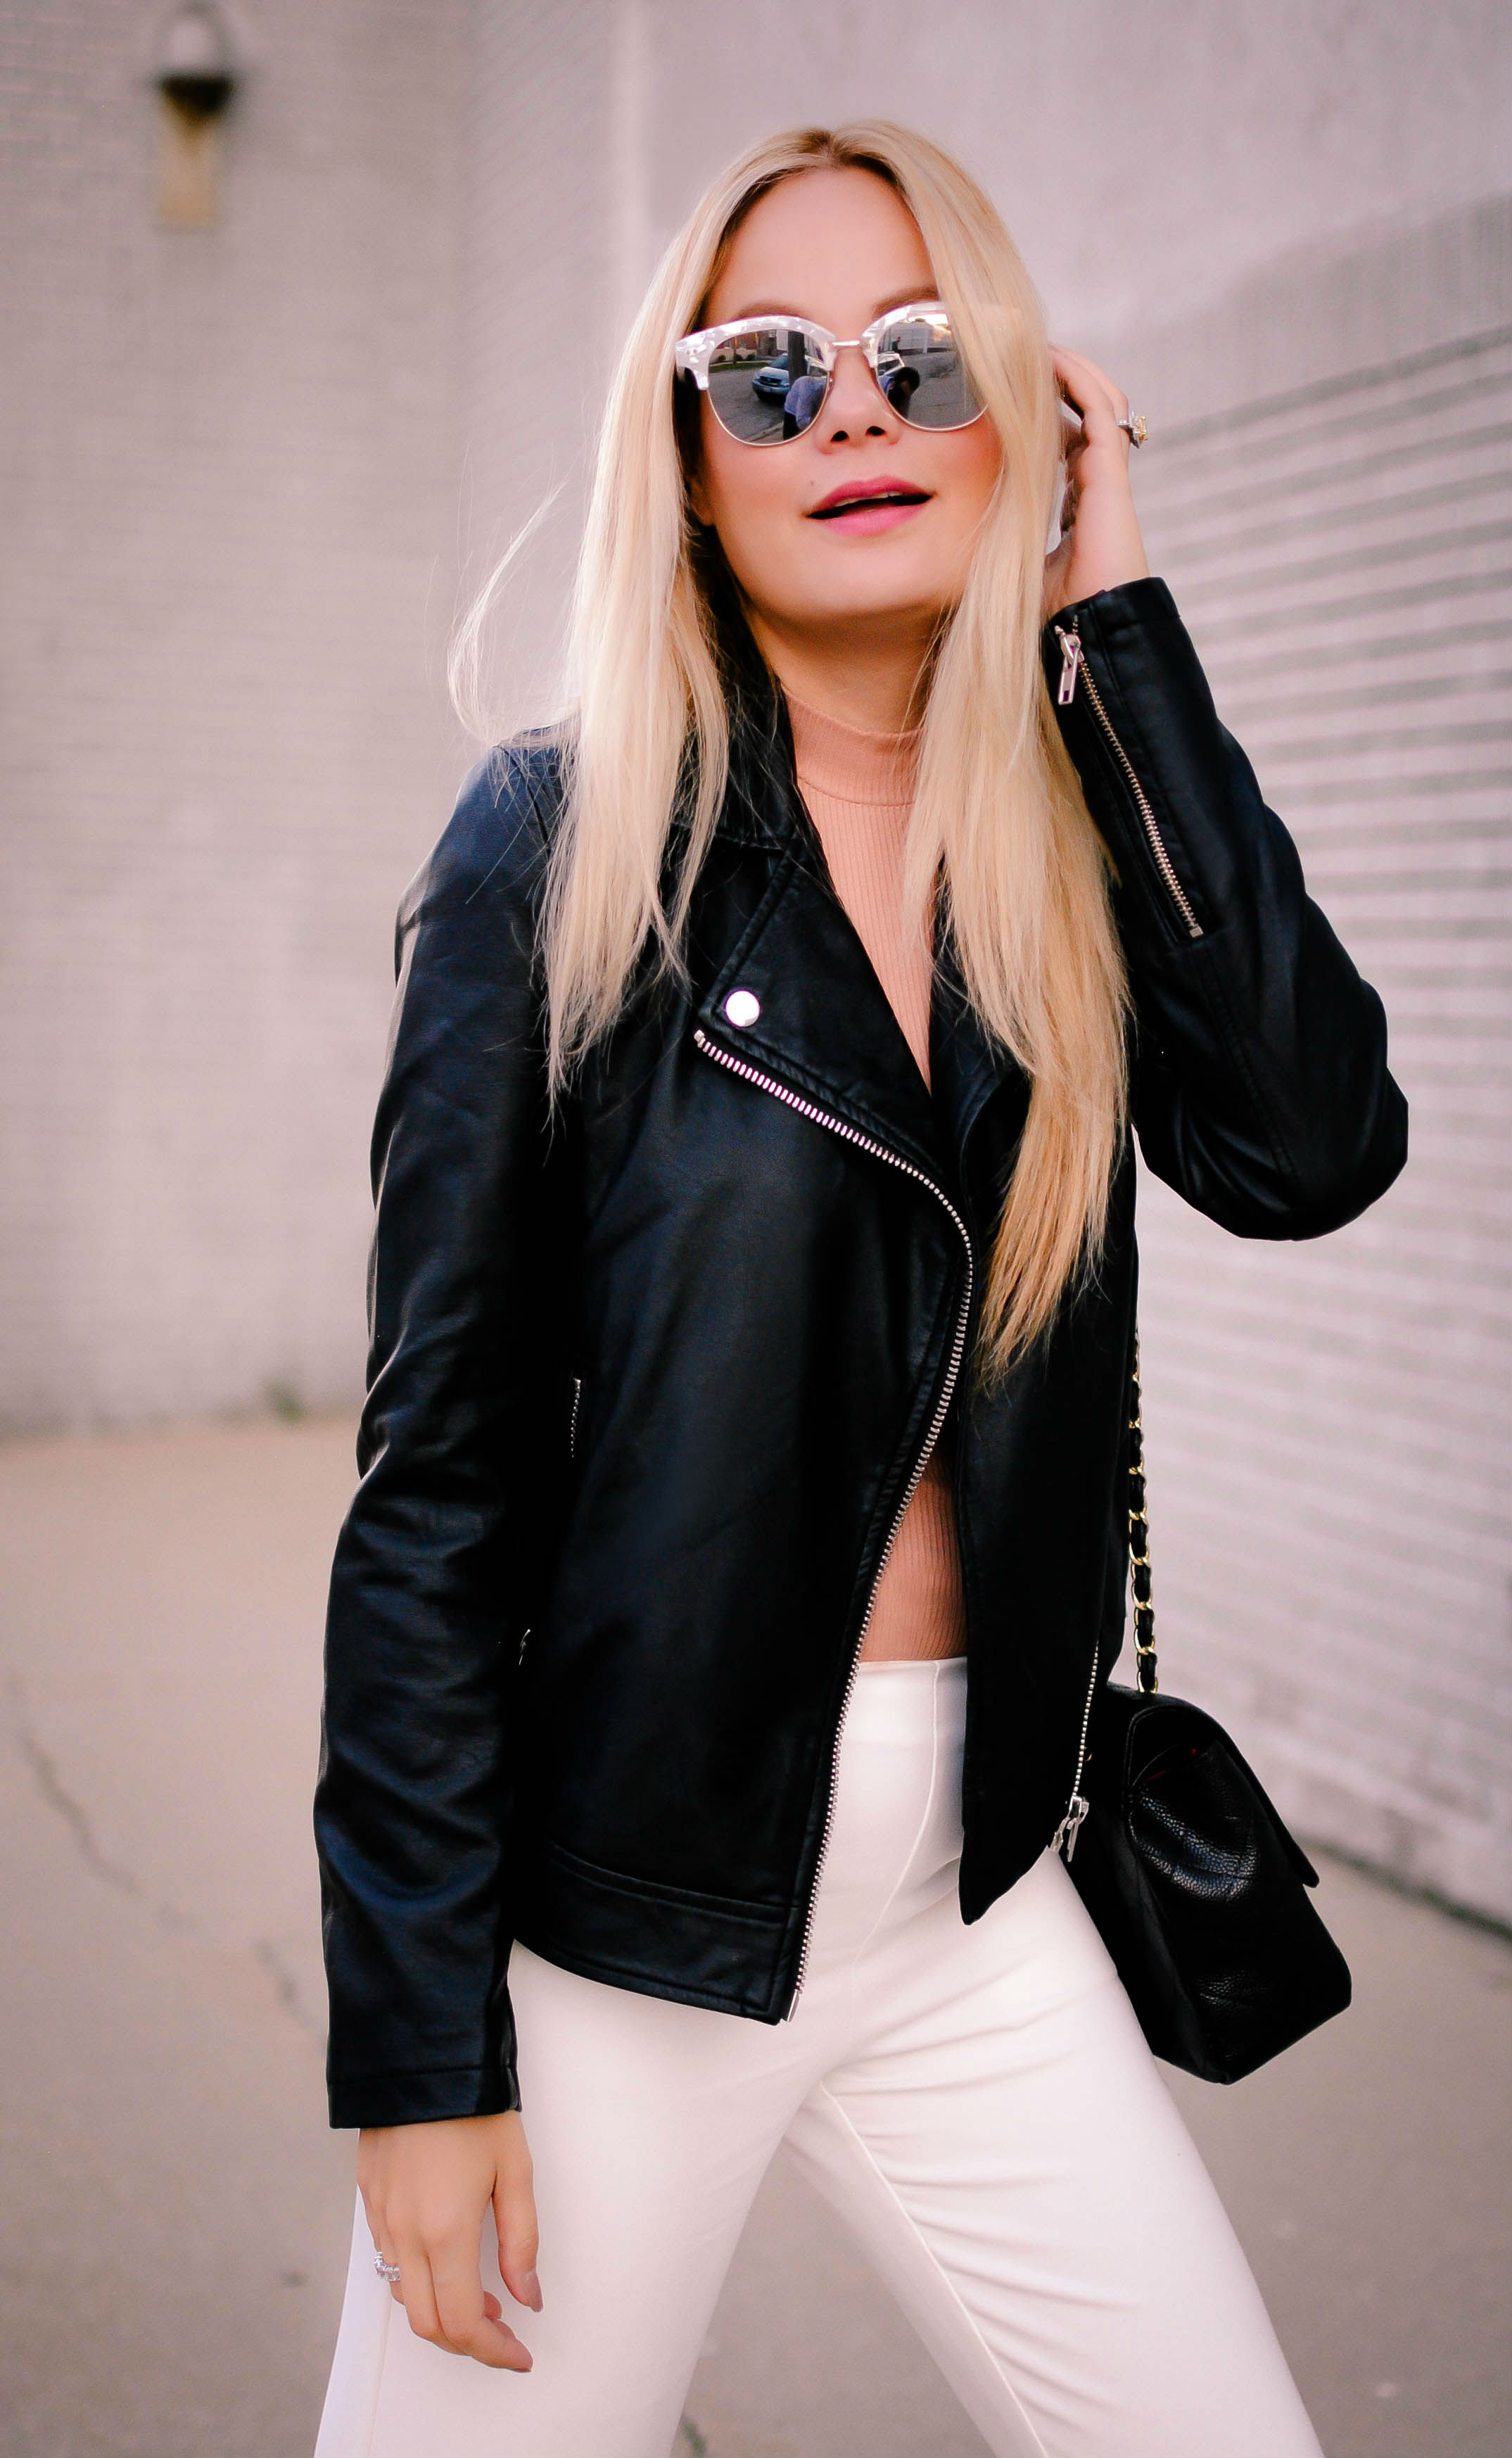 vanessa-lambert-blogger-behind-what-would-v-wear-wears-a-black-and-white-look-from-forever21_1